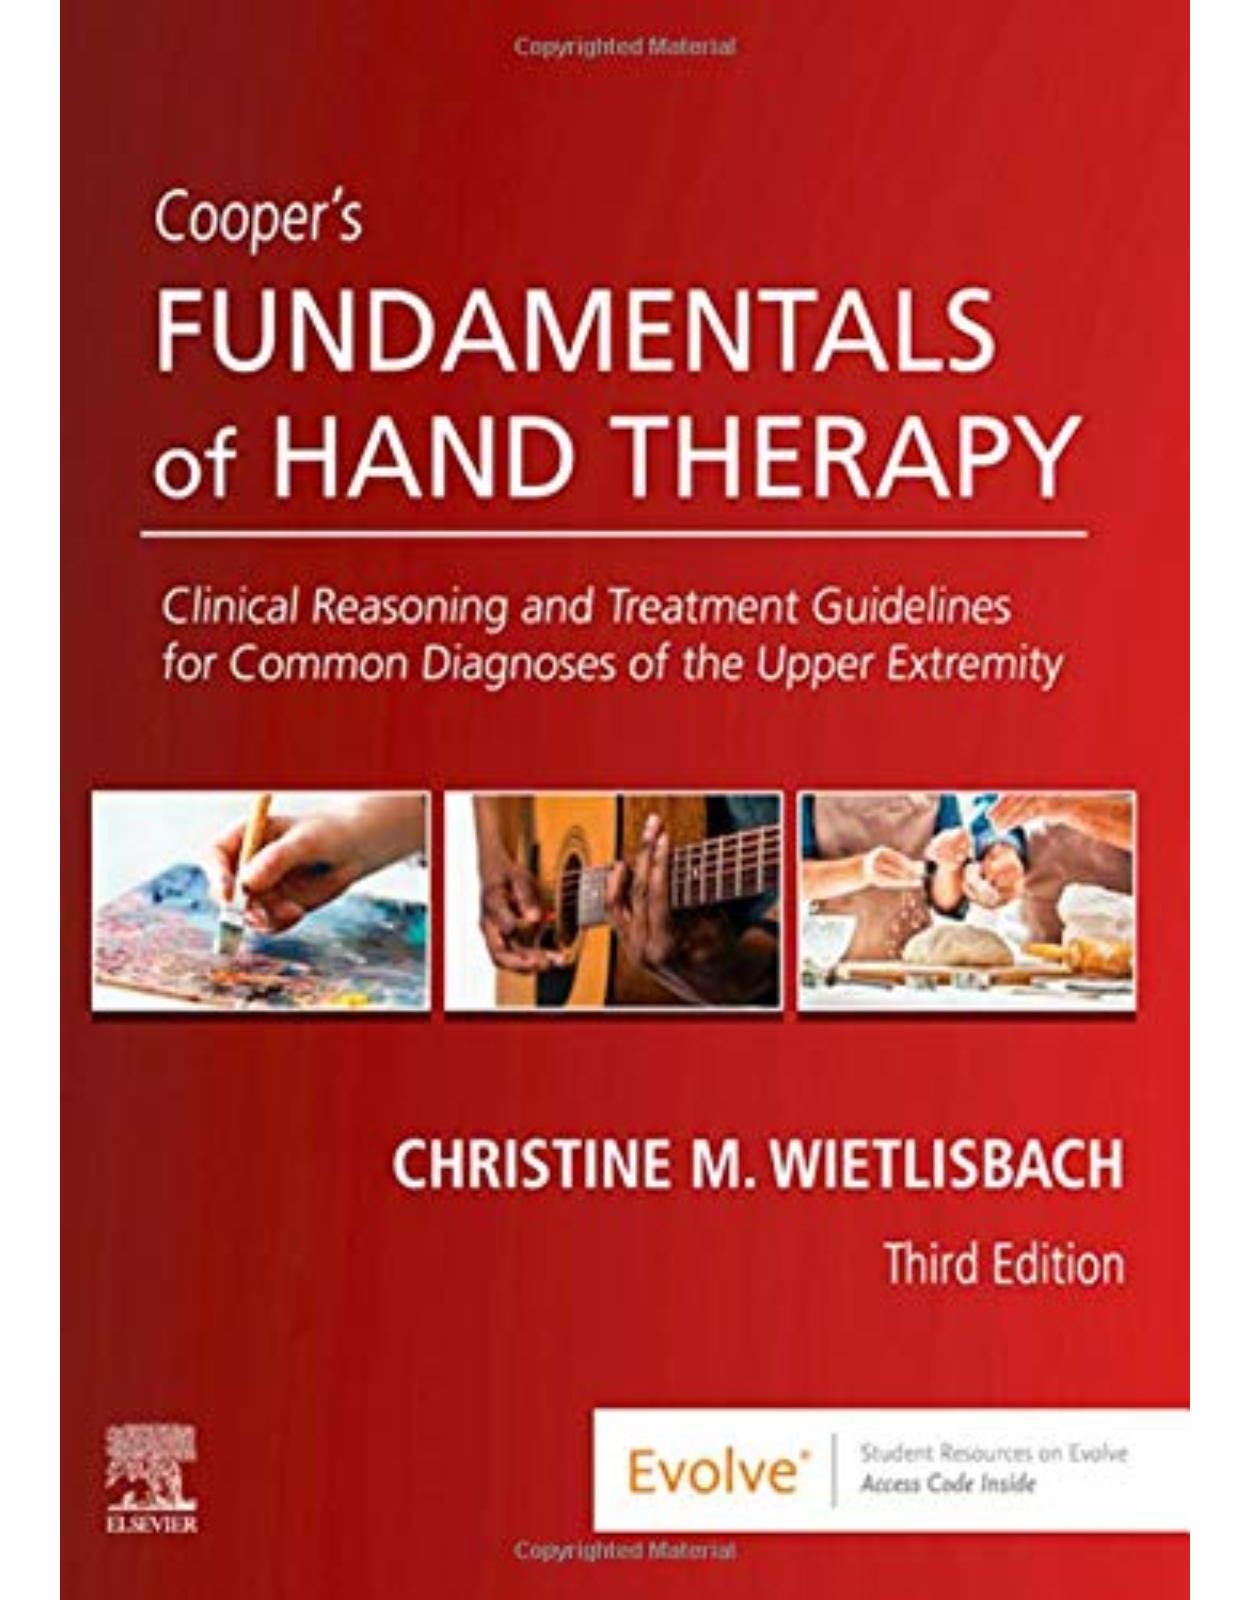 Cooper’s Fundamentals of Hand Therapy: Clinical Reasoning and Treatment Guidelines for Common Diagnoses of the Upper Extremity